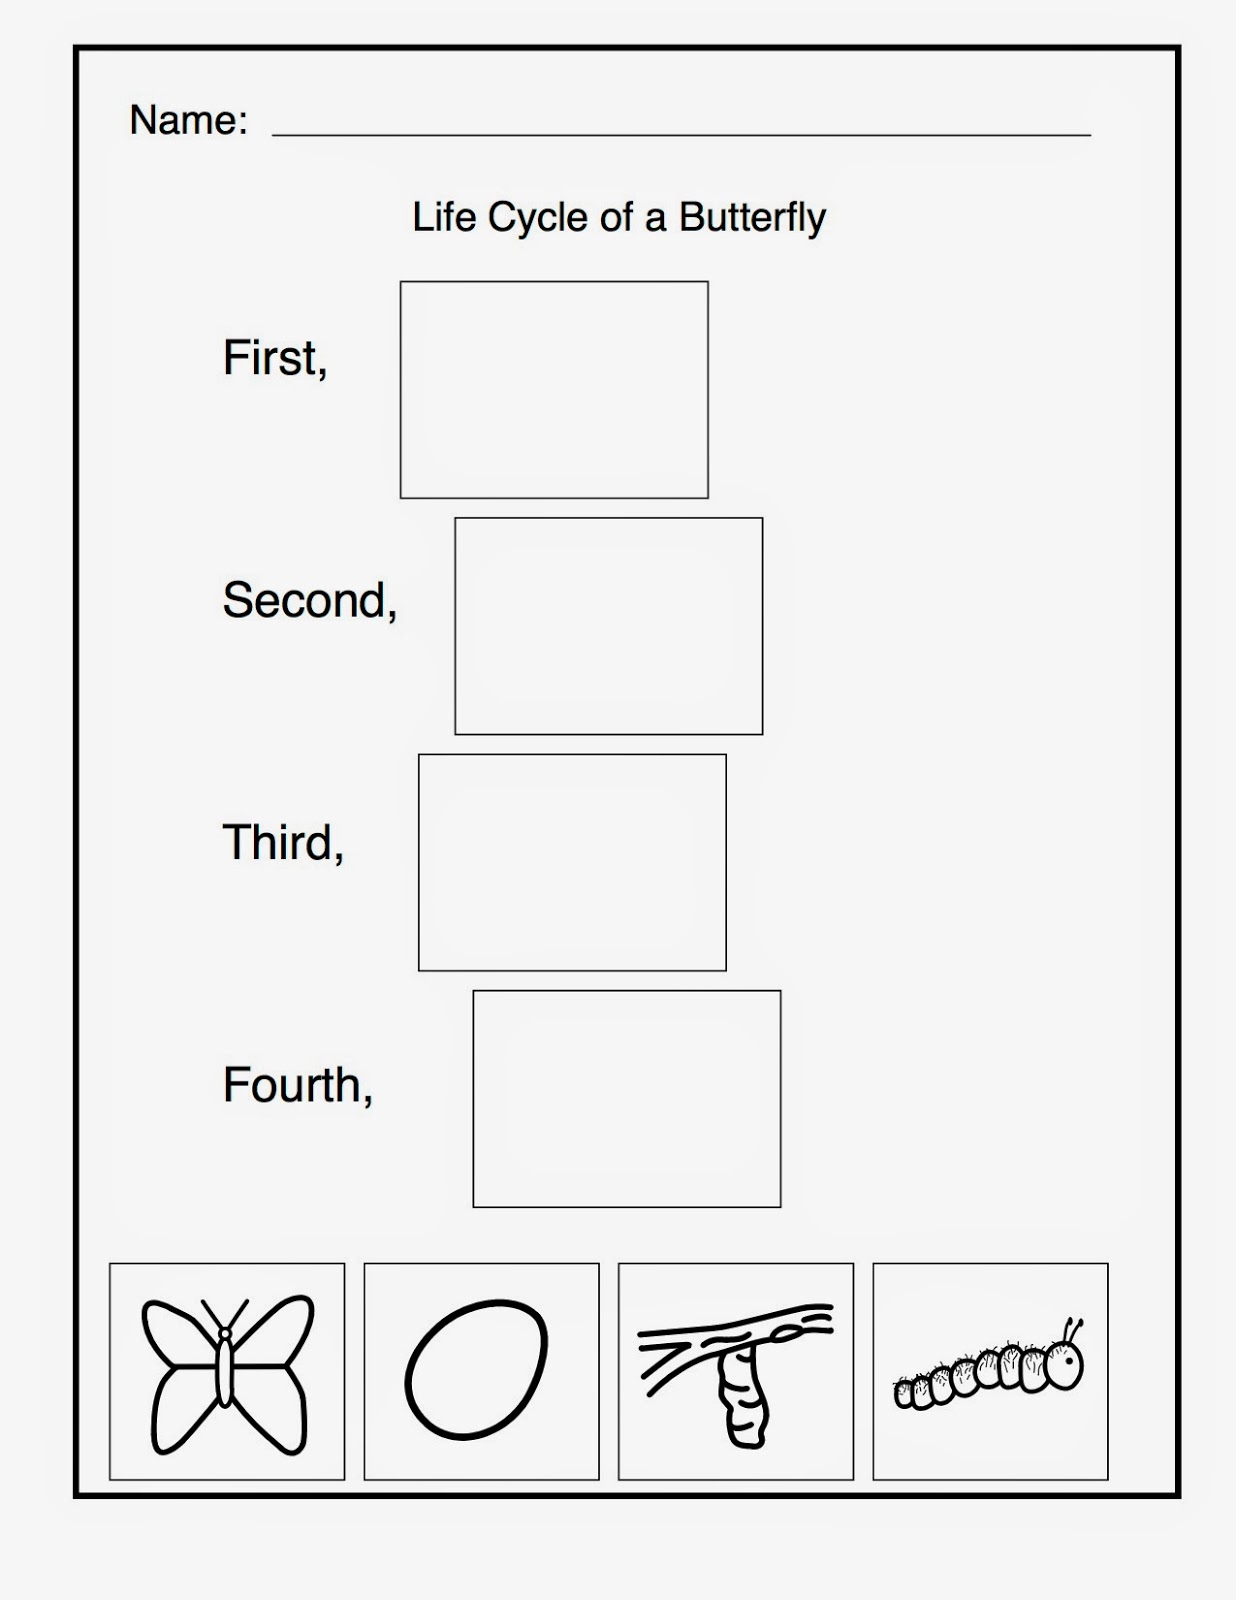 11 Best Images of Cycle Of Butterfly Worksheets Preschool ...